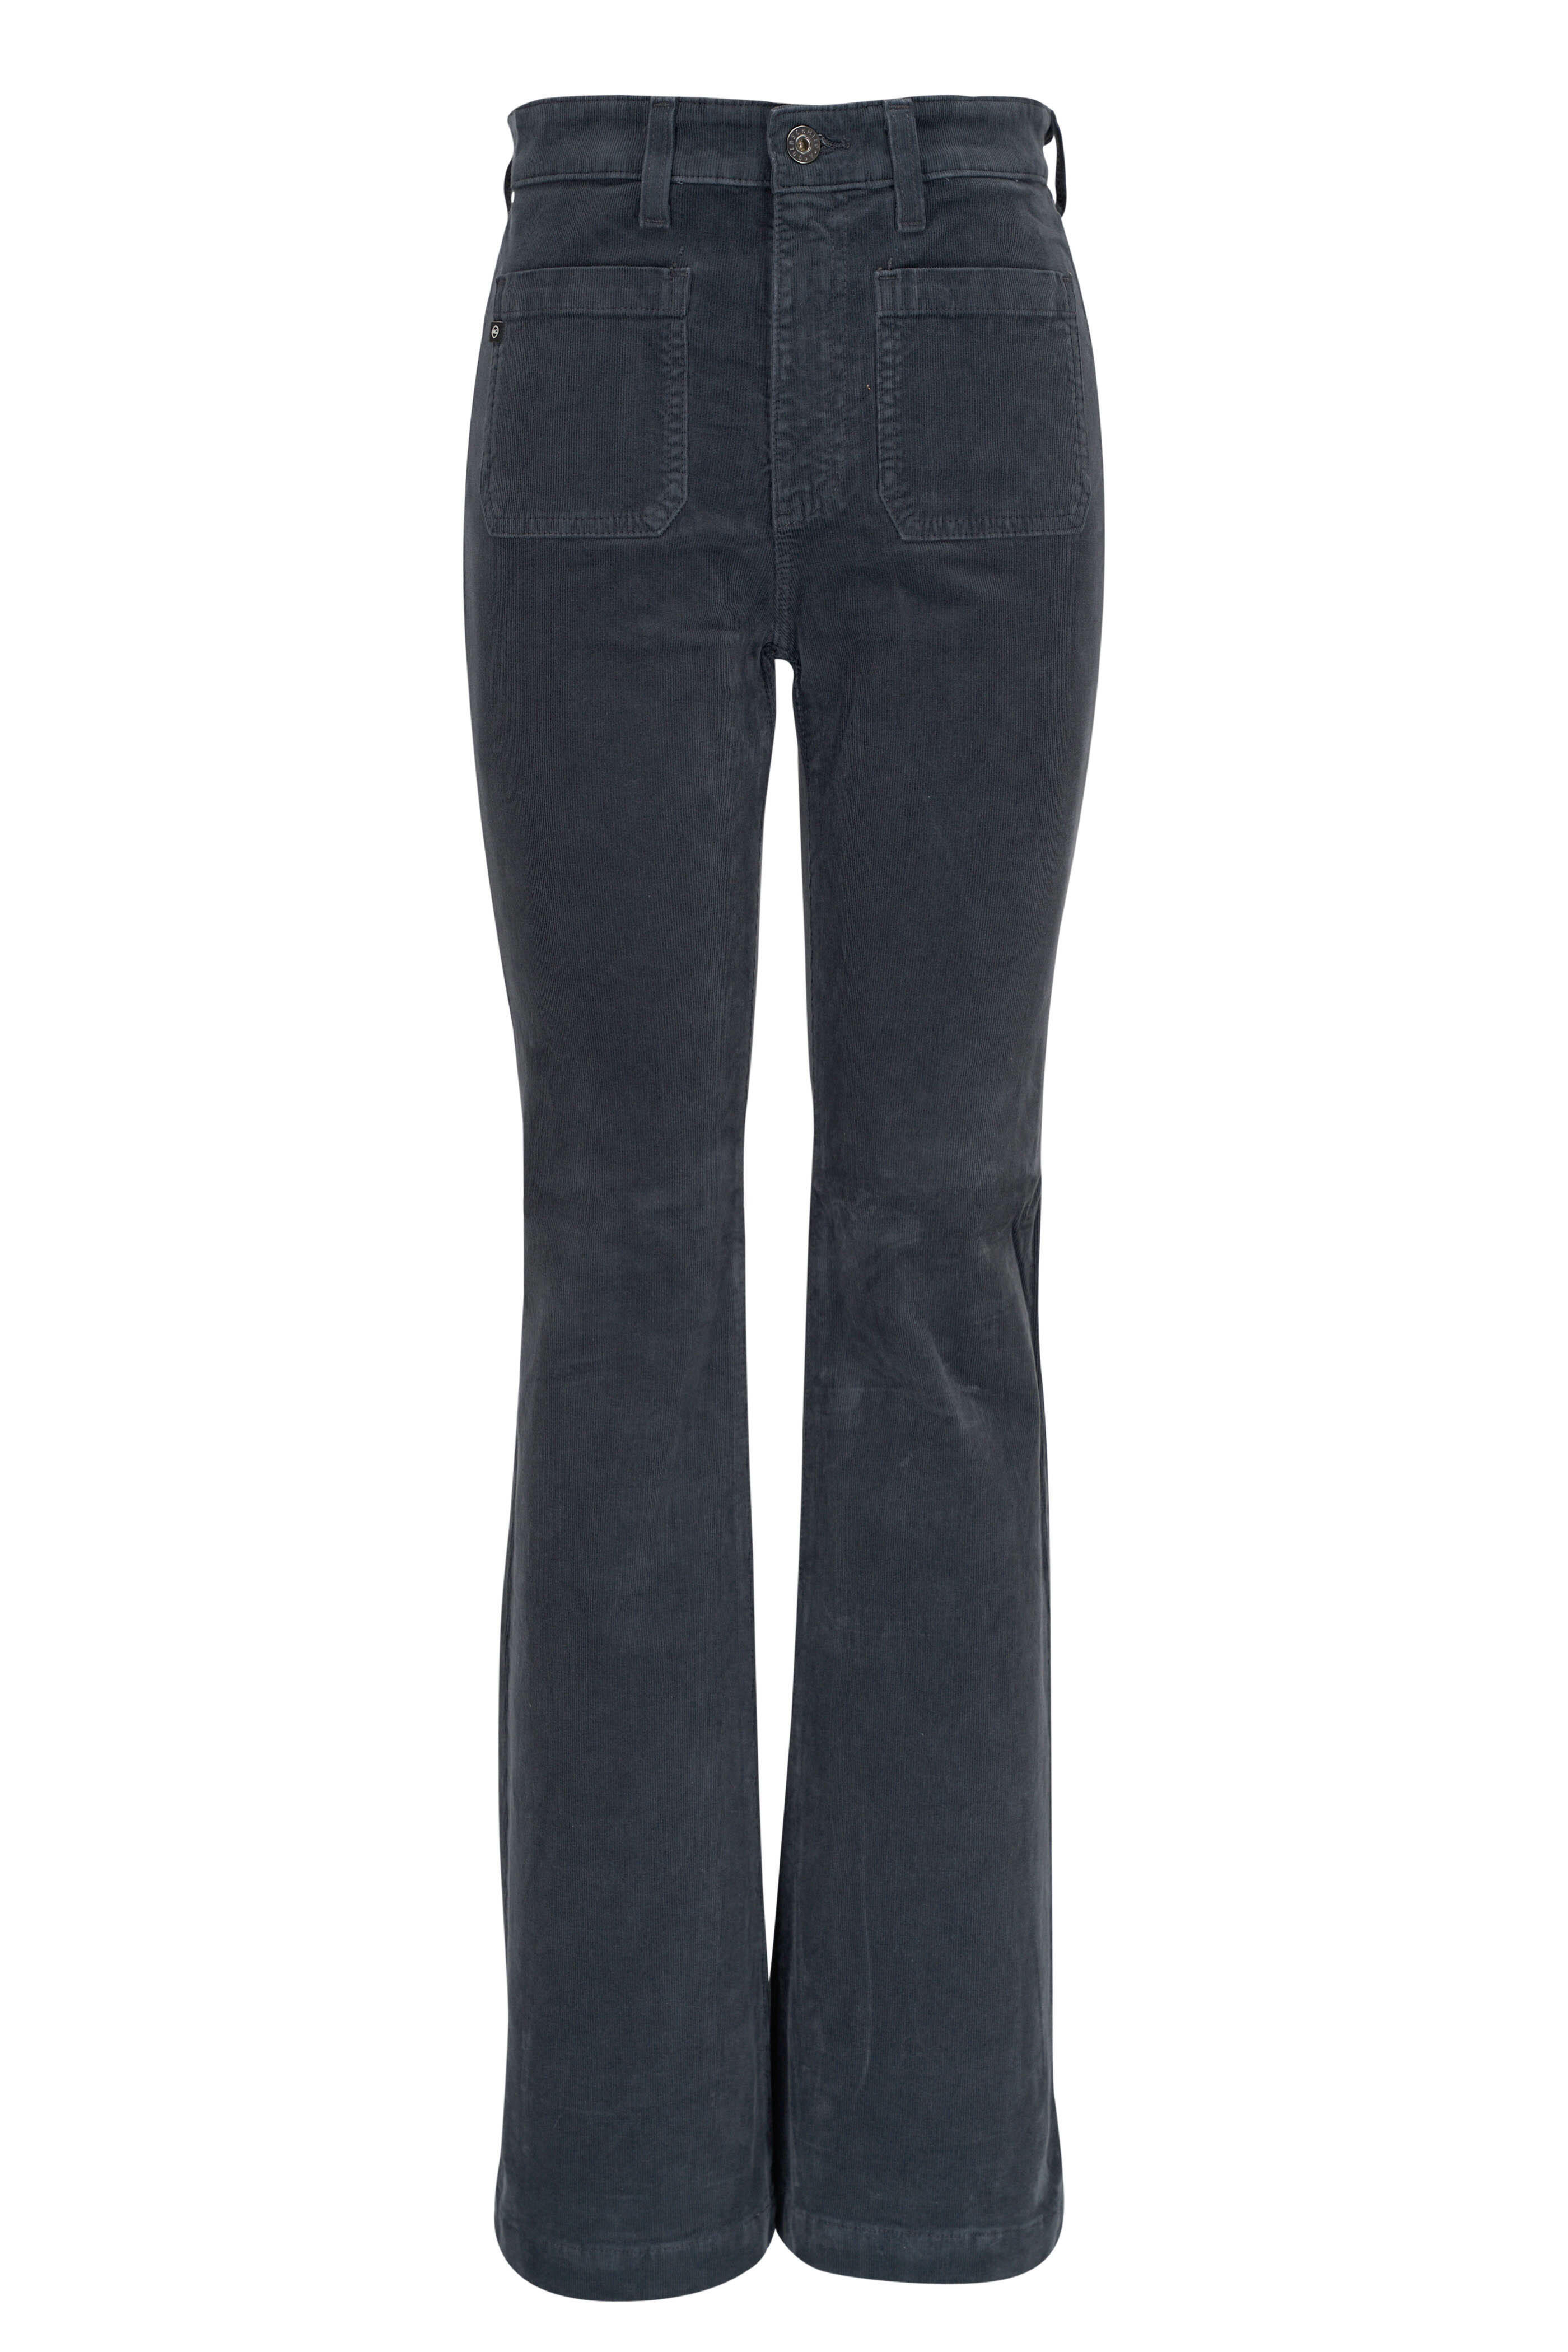 AG - Anisten Corduroy Flare Bootcut Jean | Mitchell Stores